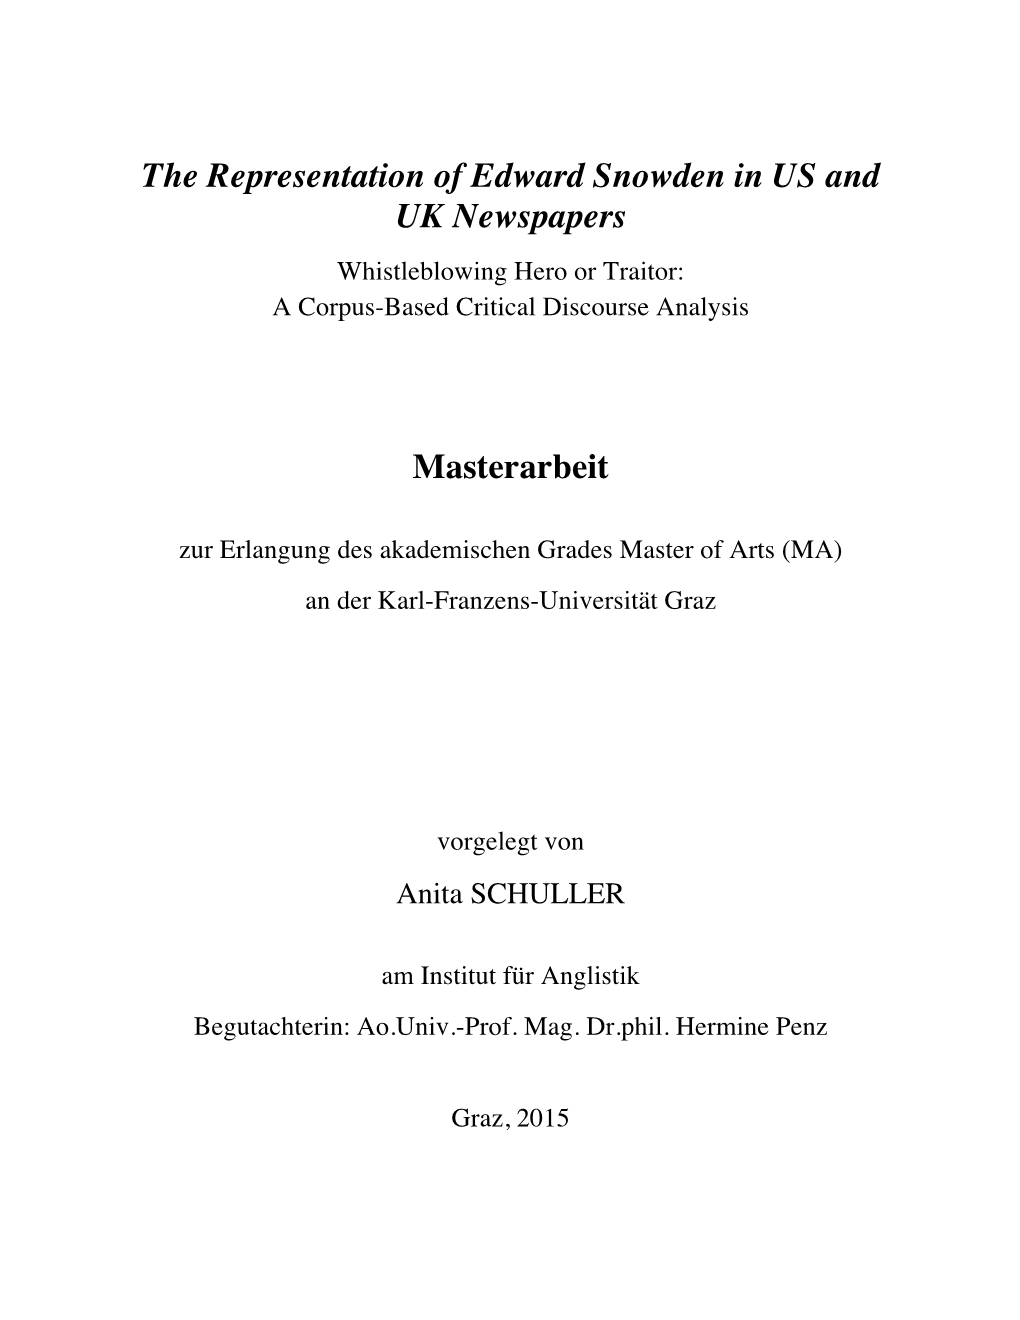 The Representation of Edward Snowden in US and UK Newspapers Whistleblowing Hero Or Traitor: a Corpus-Based Critical Discourse Analysis